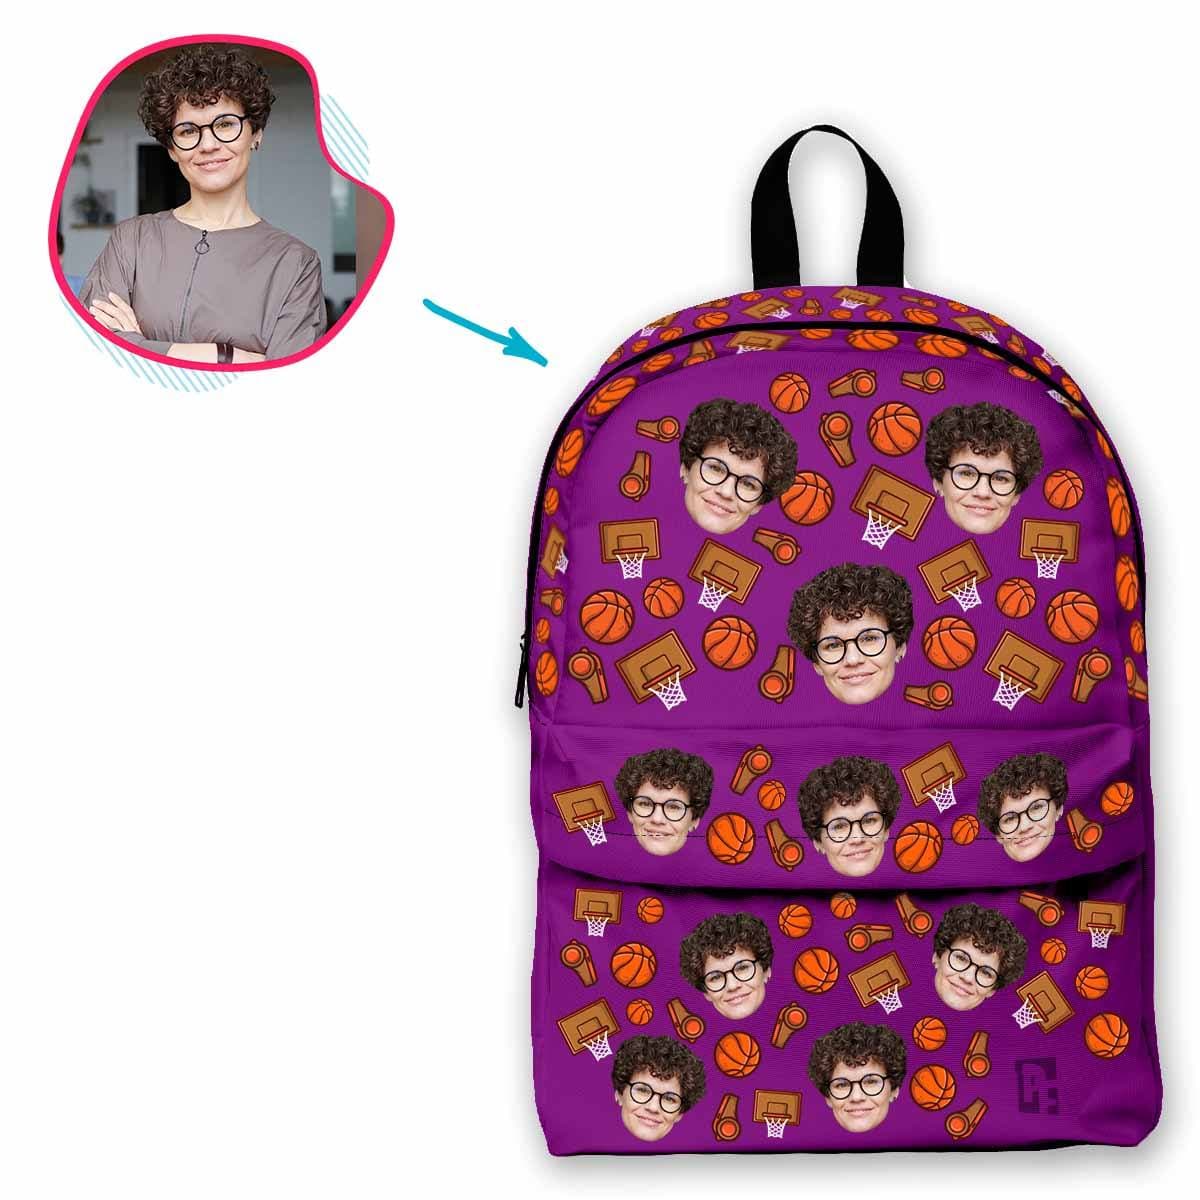 purple Basketball classic backpack personalized with photo of face printed on it